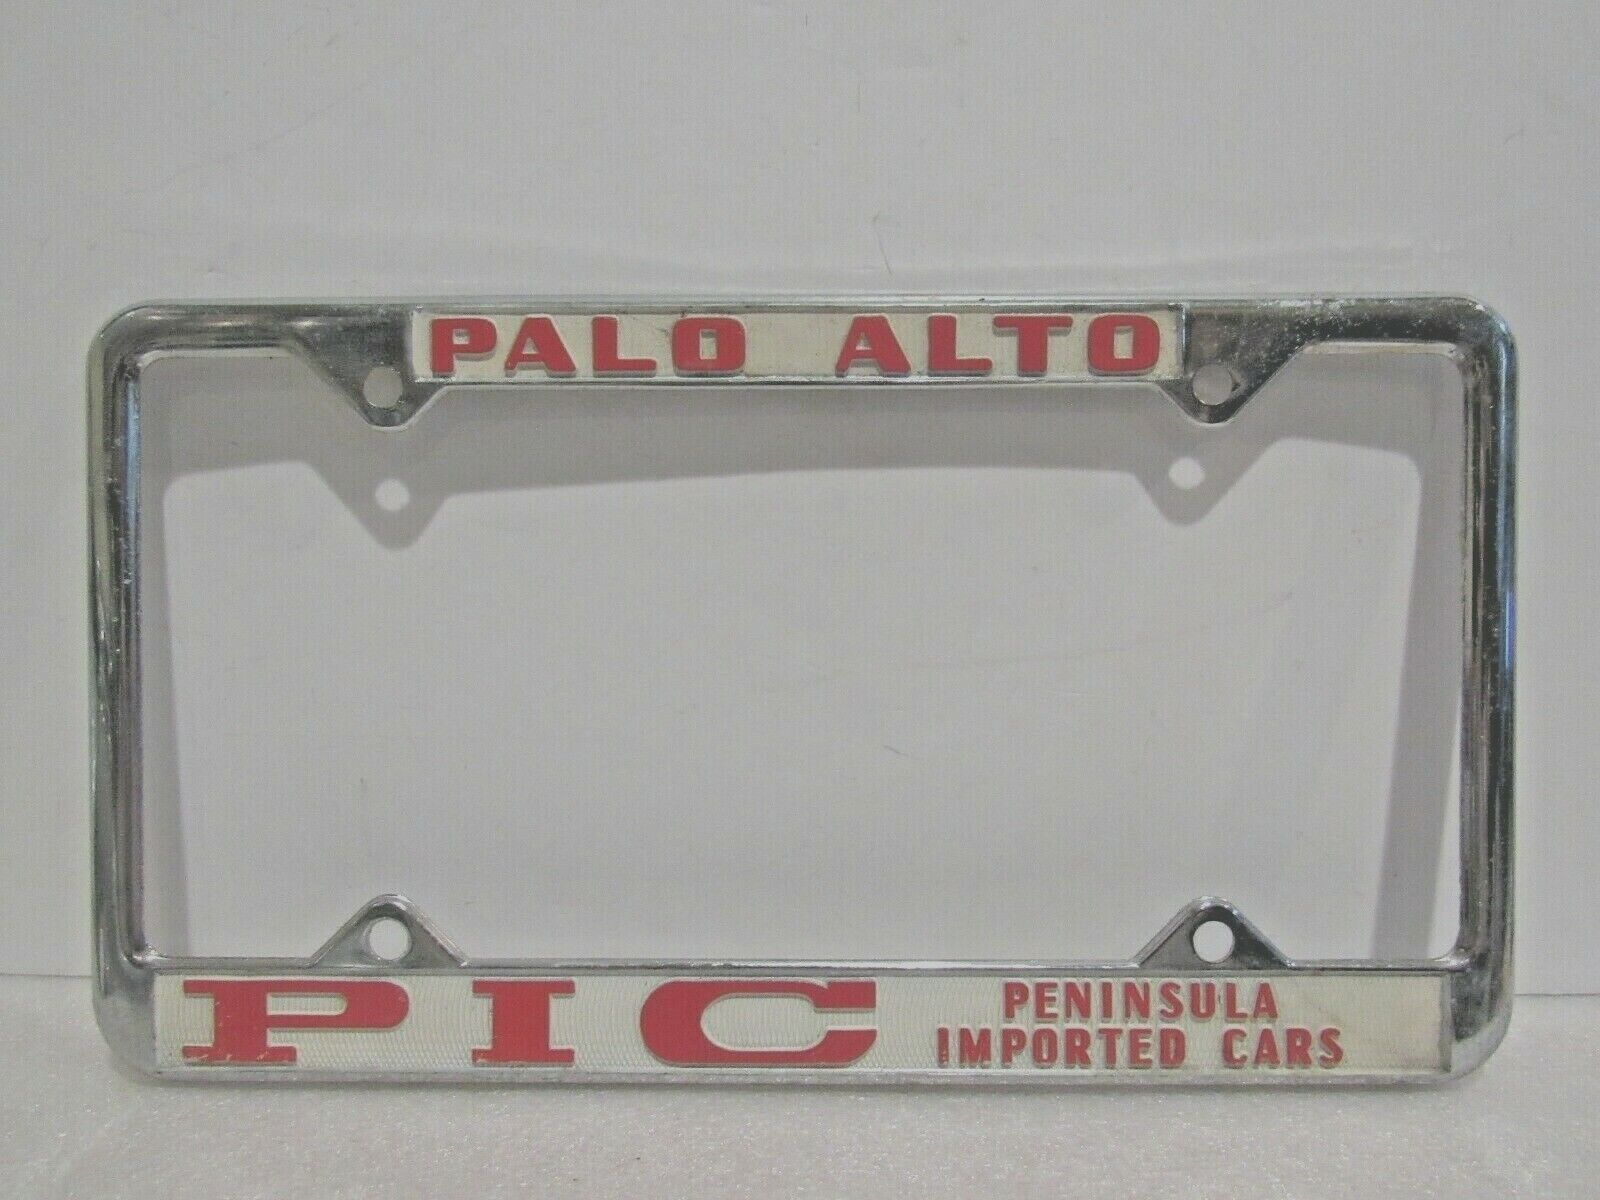 Vintage Palo Alto PIC Peninsula Imported Cars License Plate Frame Metal Embossed